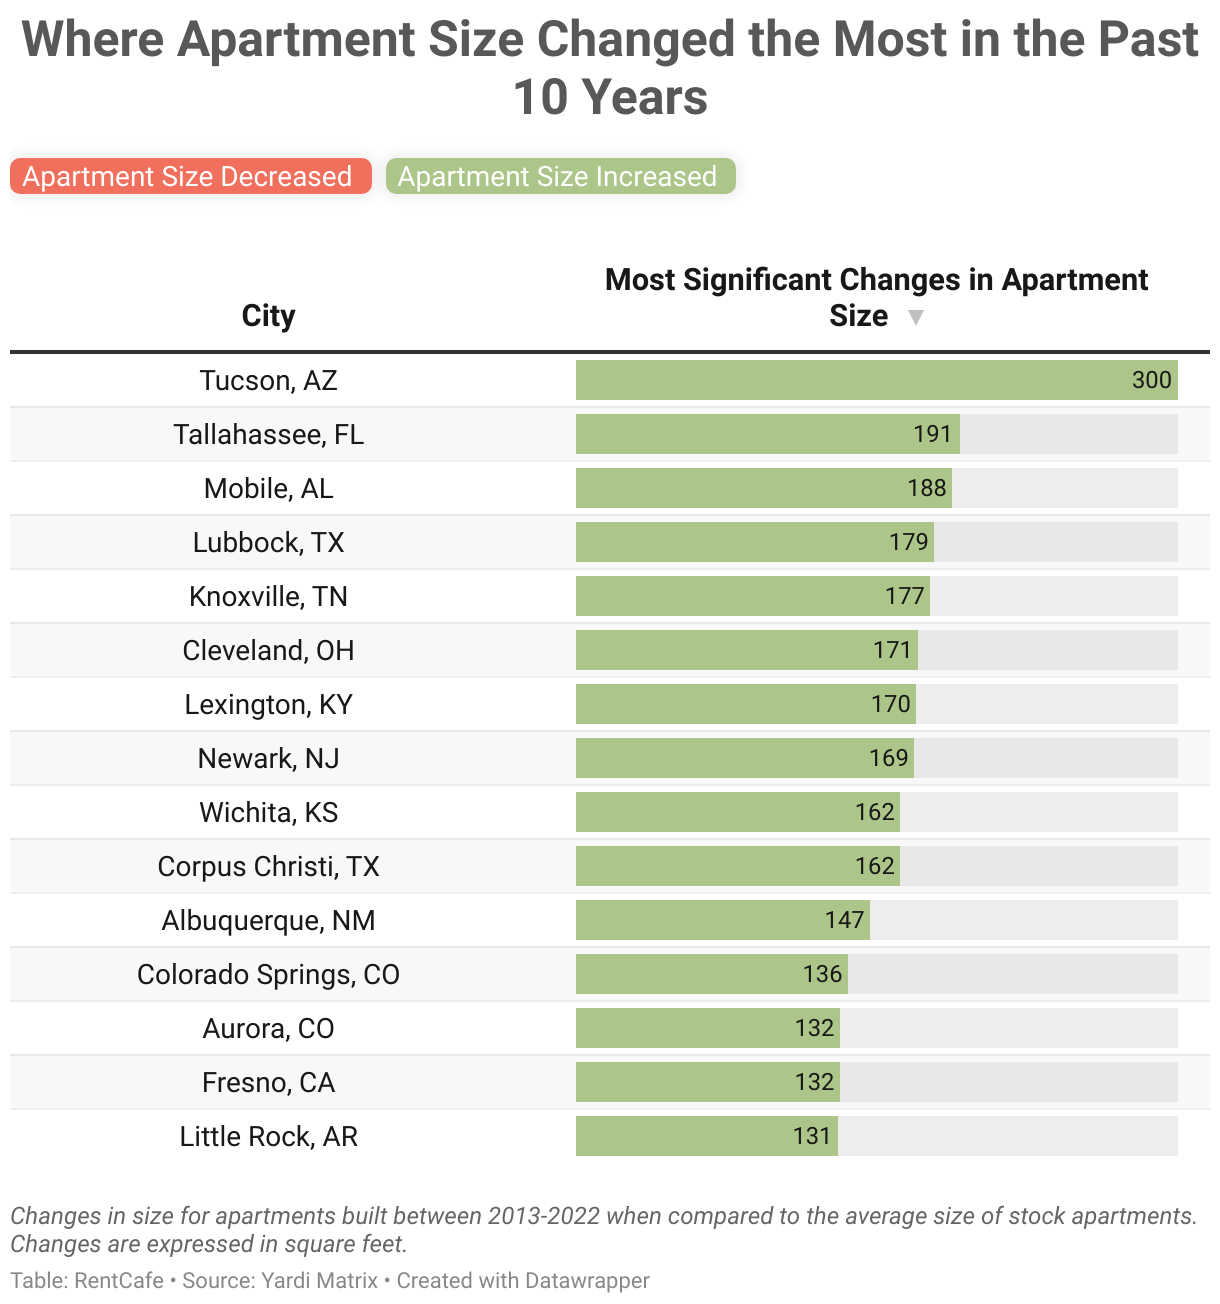 where-apartment-size-changed-the-most-in-the-past-10-years-br-b-span-b-style-color-585859-font-size-25px-b-.png